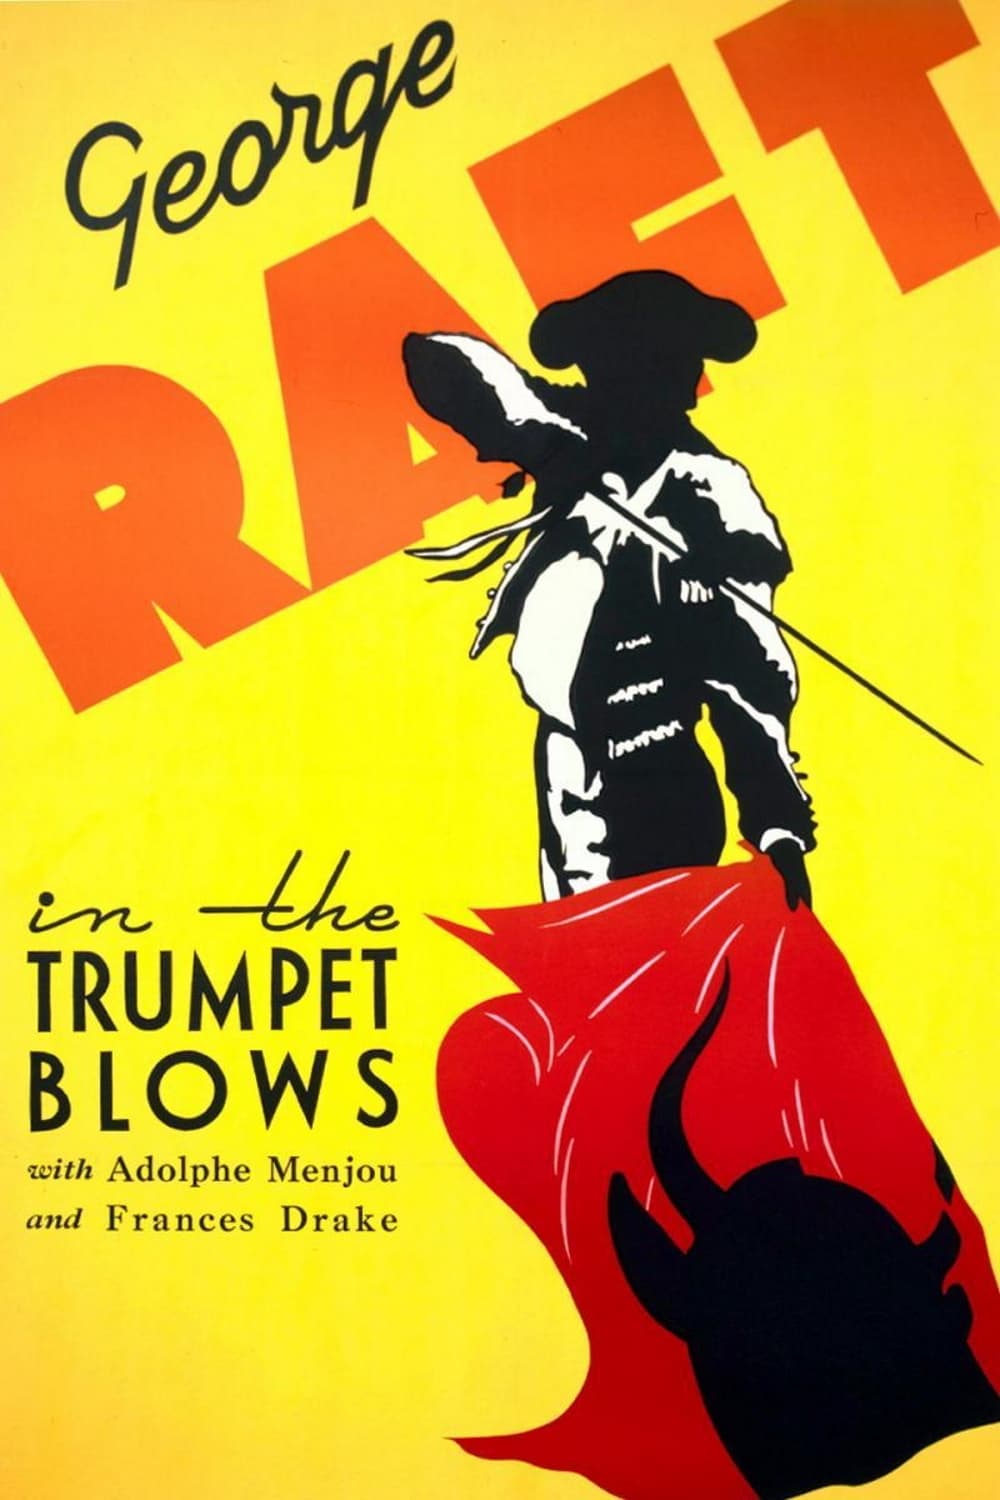 The Trumpet Blows (1934)